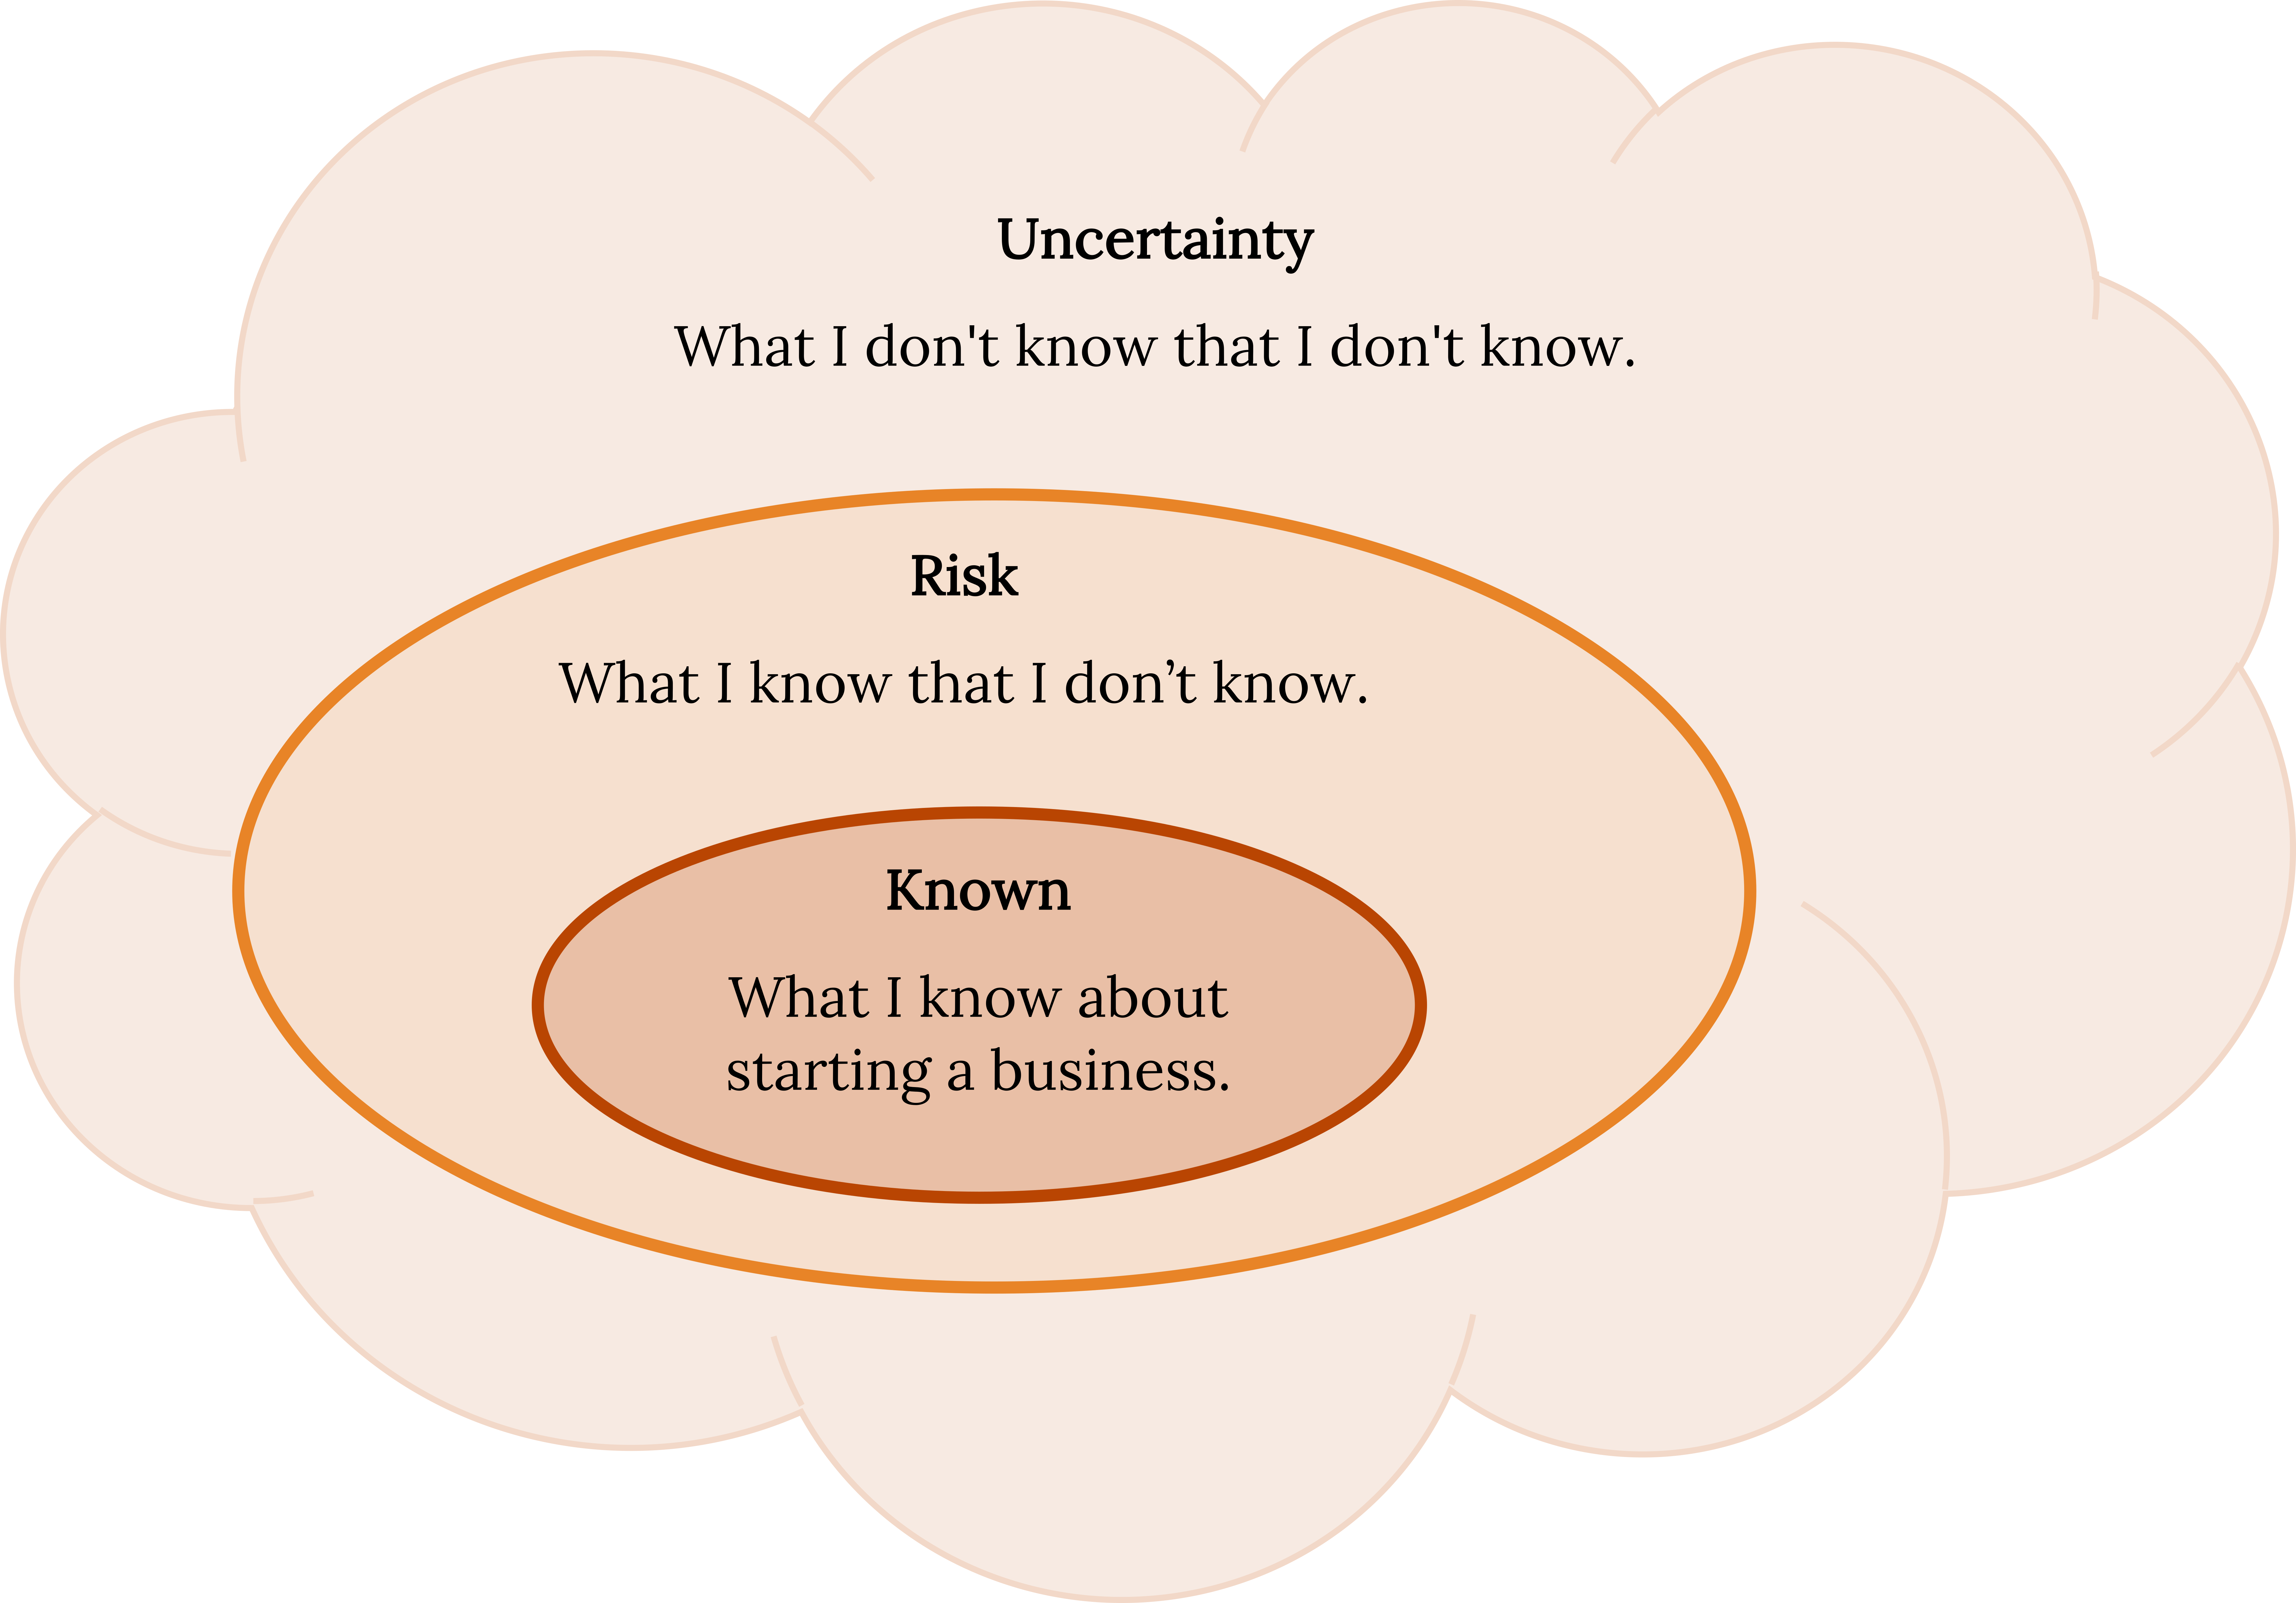 Three circles, stacked inside of eachother. Innermost: Known (what i know about starting a business). Next level: Risk (what I know that I don't know). Outermost: Uncertainty (what I don't know that I don't know).